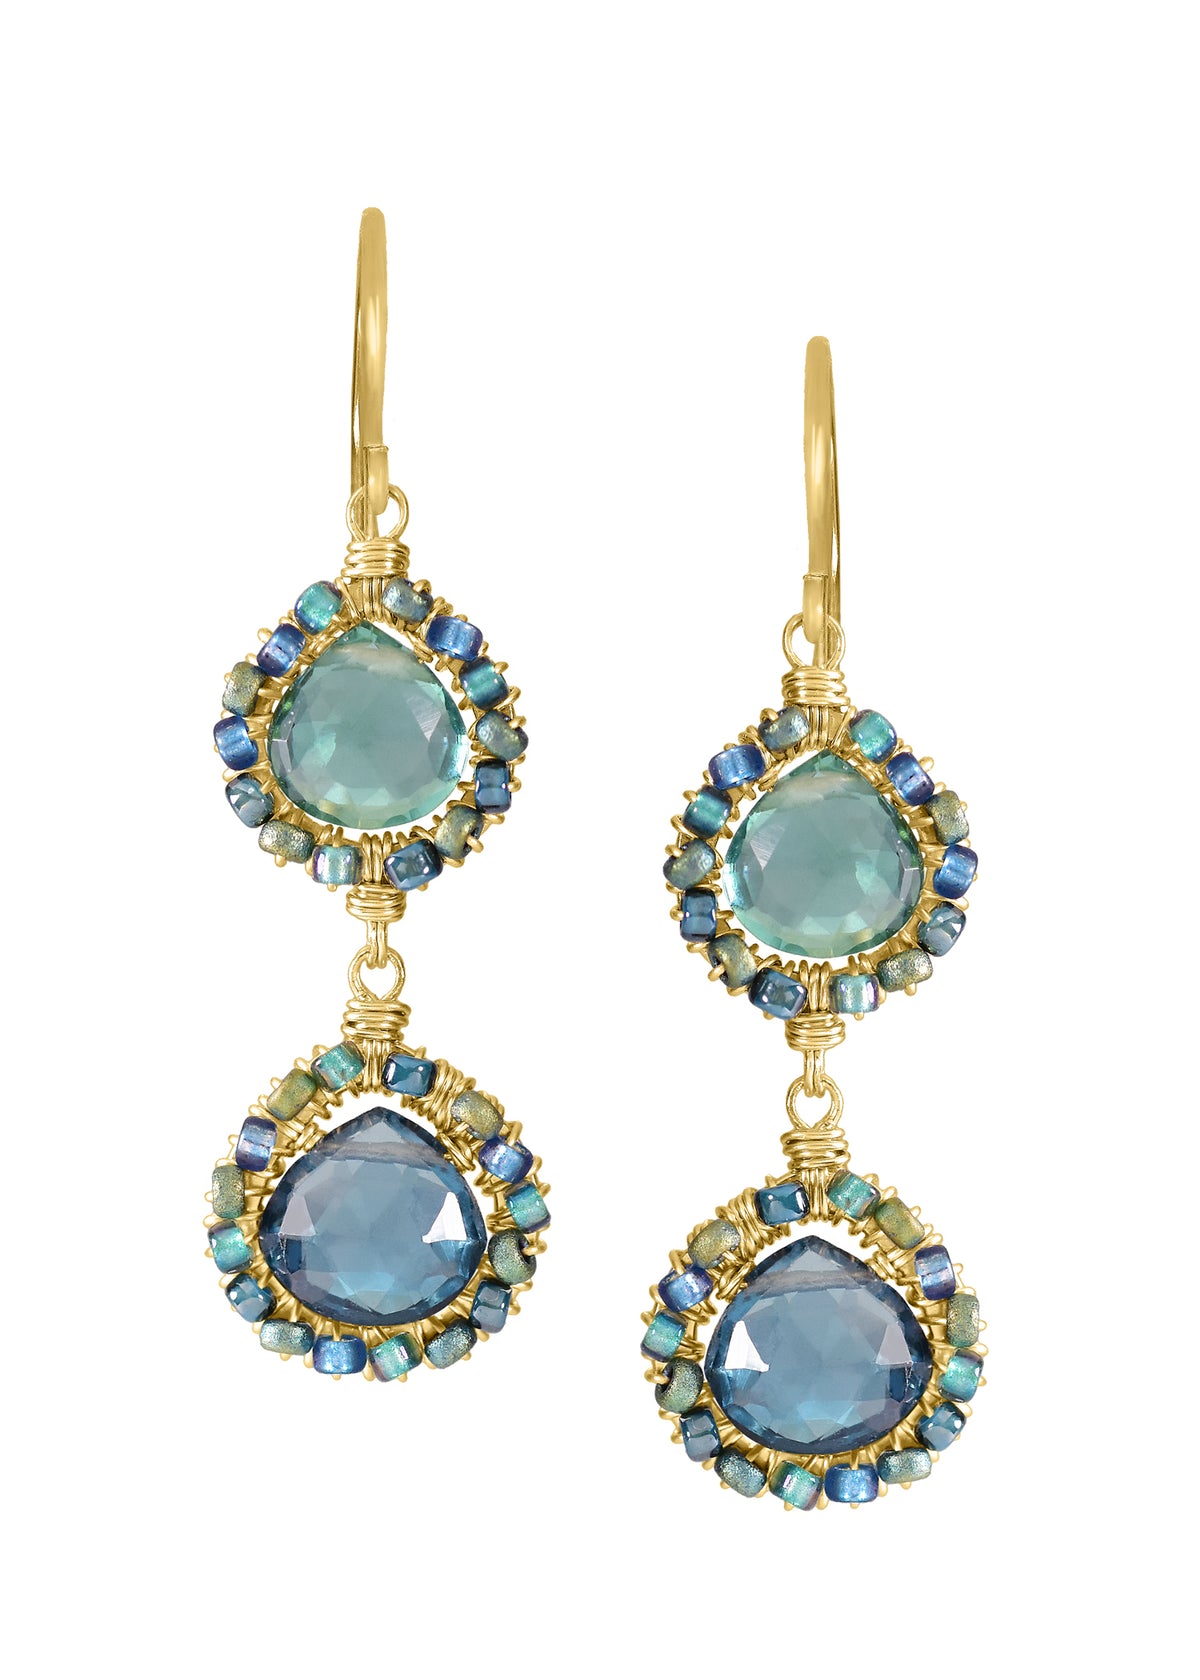 Green quartz Blue quartz Seed beads 14k gold fill Earrings measure 1-5/16&quot; in length (including ear wires) and 3/8&quot; in width at the widest point Handmade in our Los Angeles studio